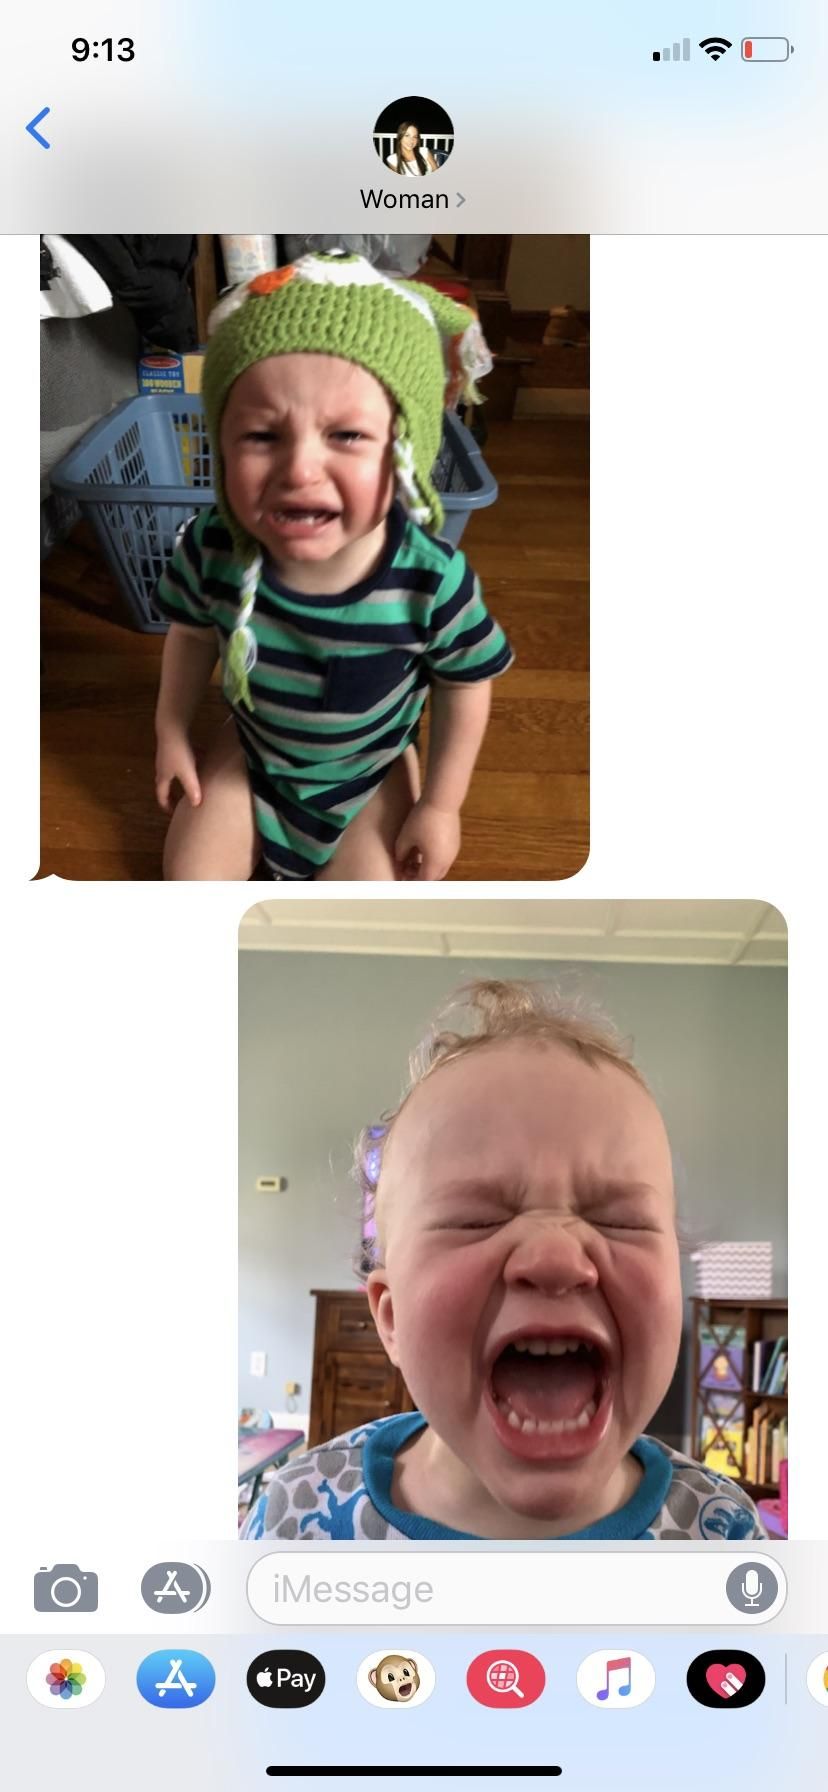 My best friend and I have an almost daily toddler tantrum competition going on.